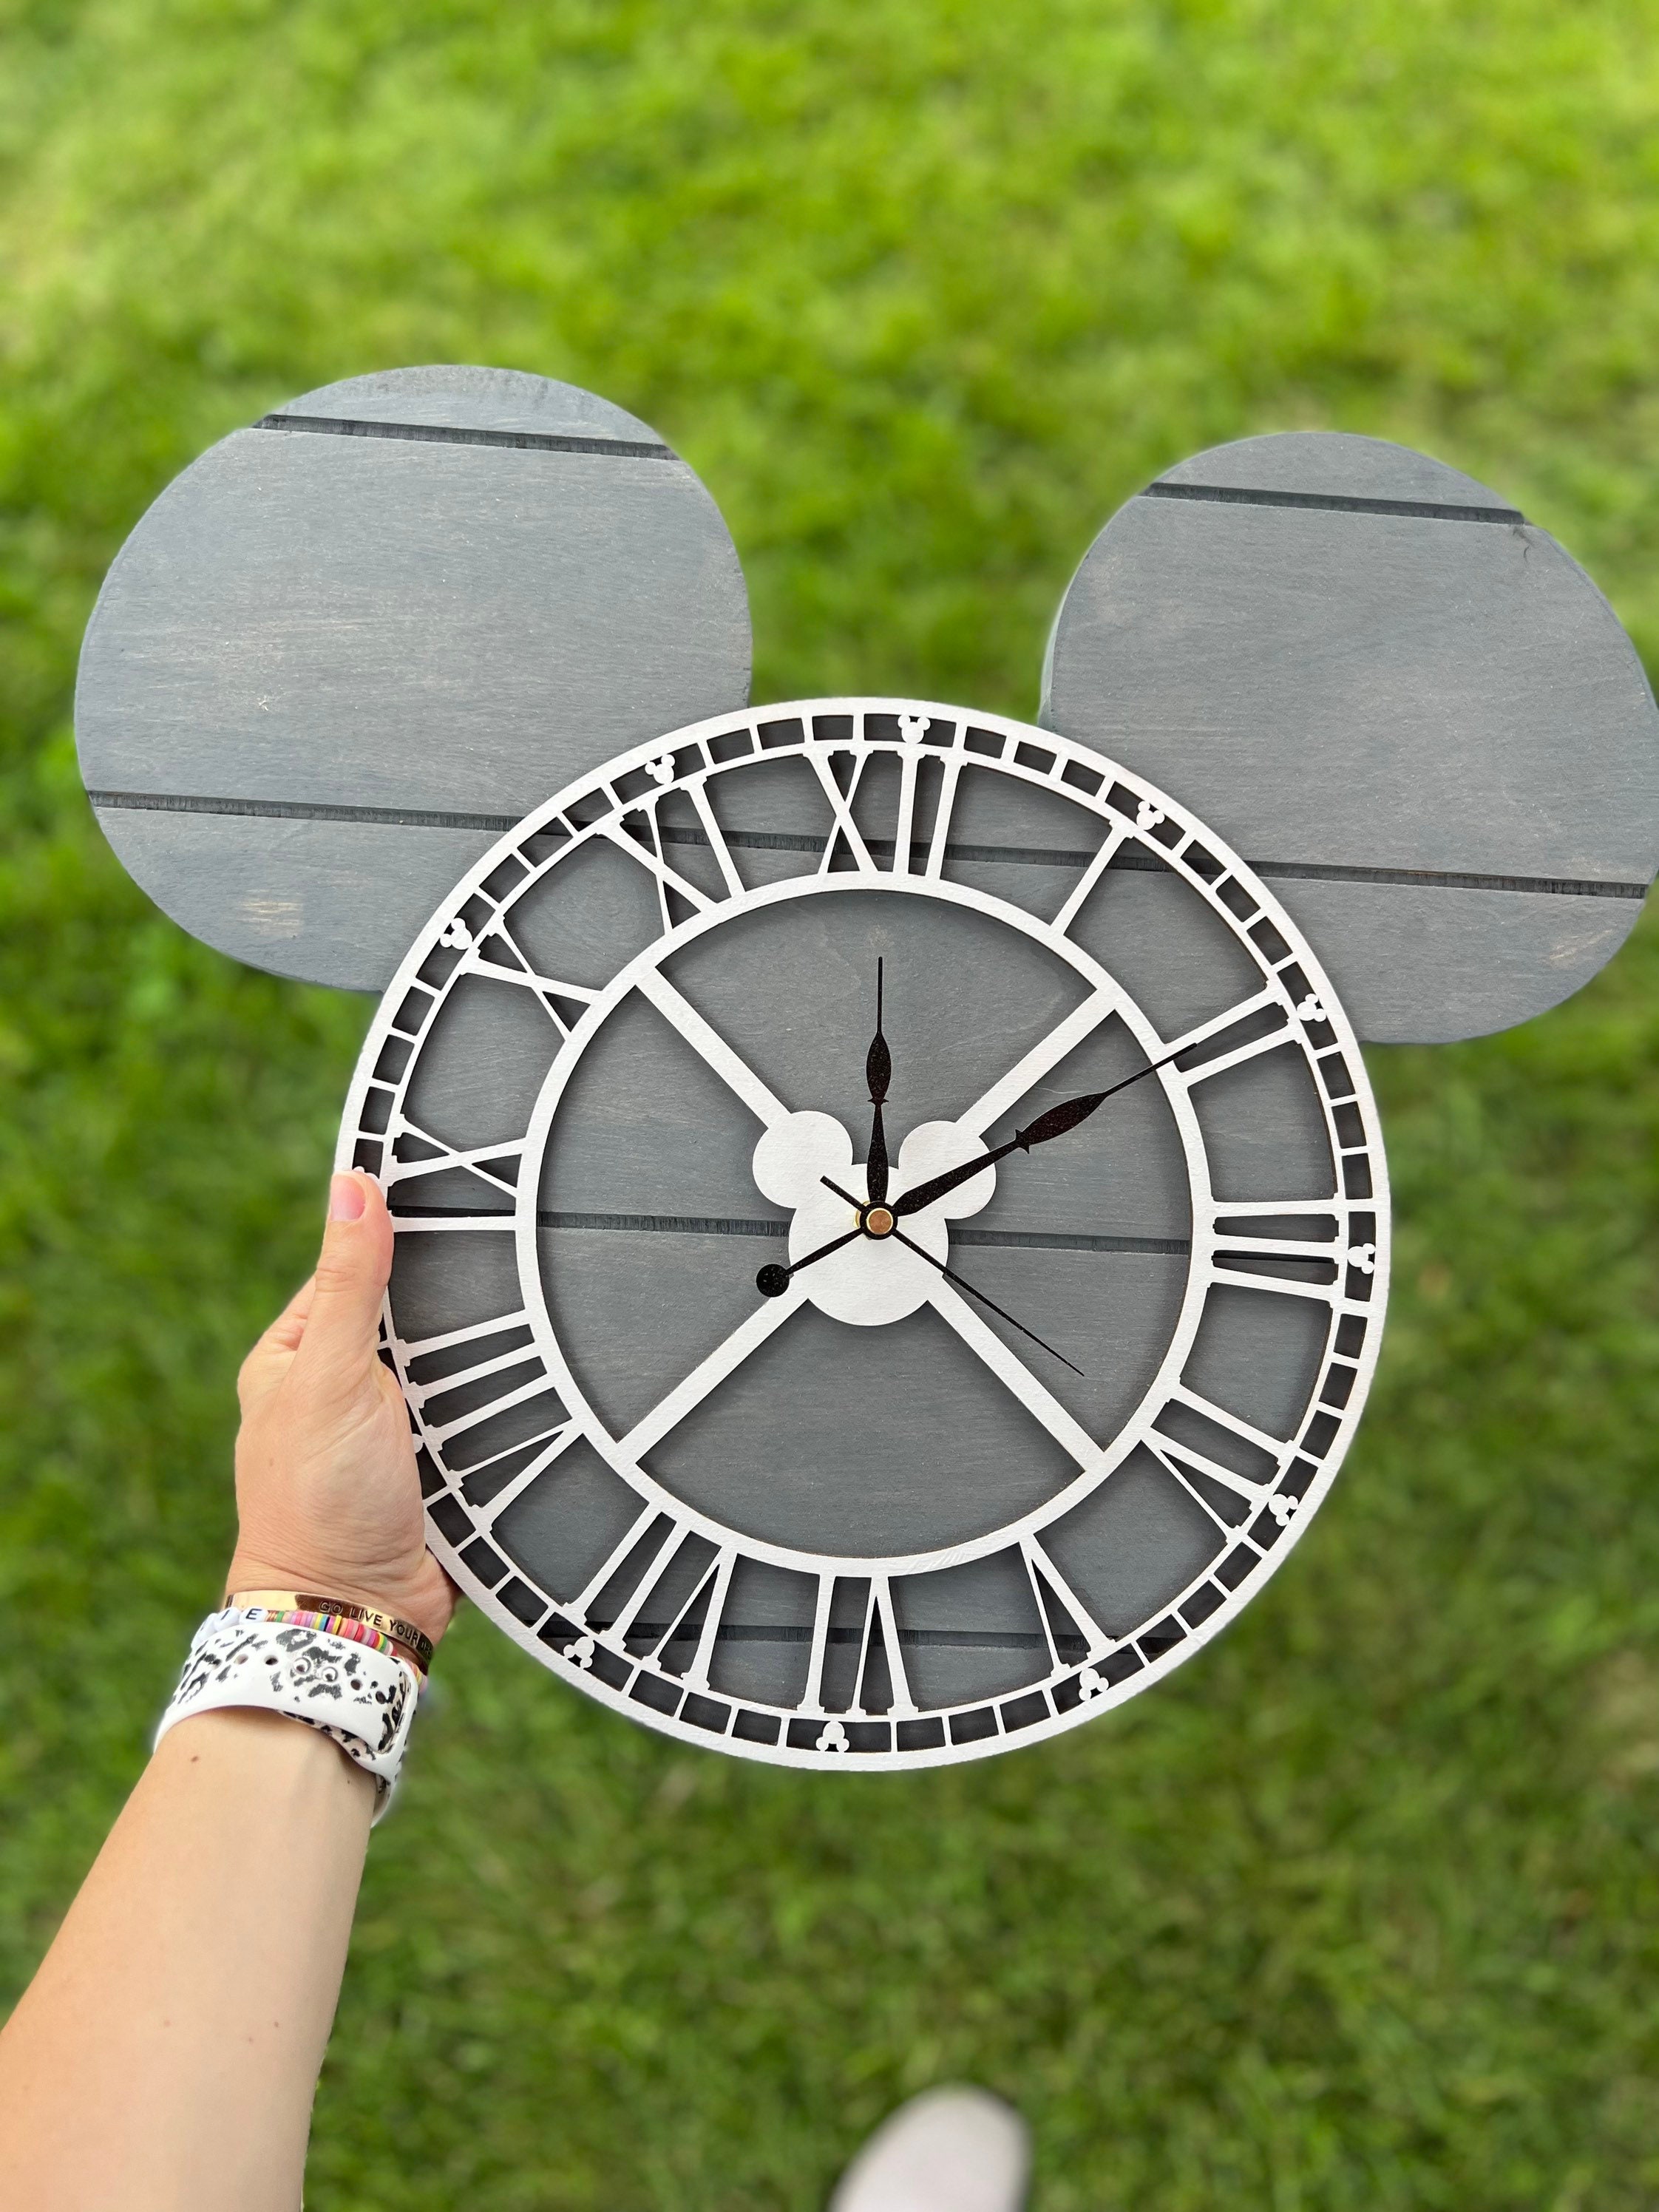 Disney Minnie Mouse Frameless Borderless Wall Clock For Gifts or Decor E123